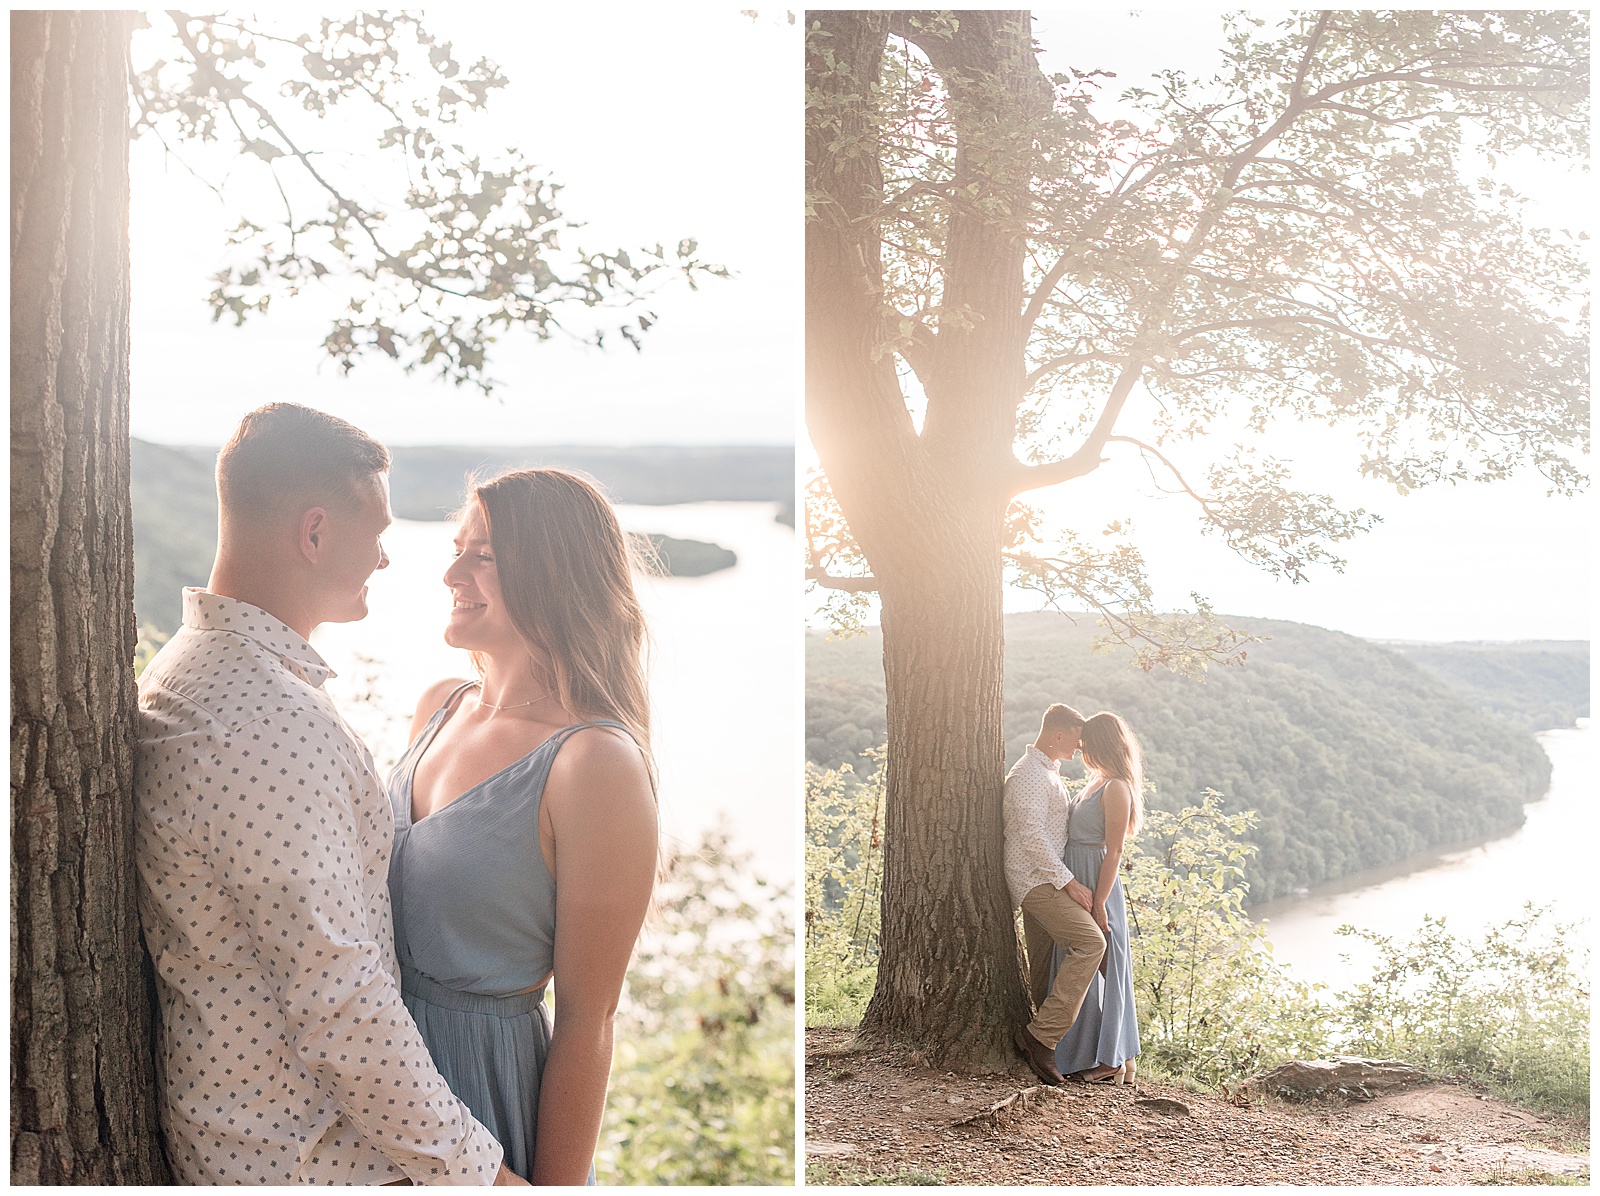 guy leaning back against tree on sunny evening as girl leans in and kisses him at pinnacle overlook